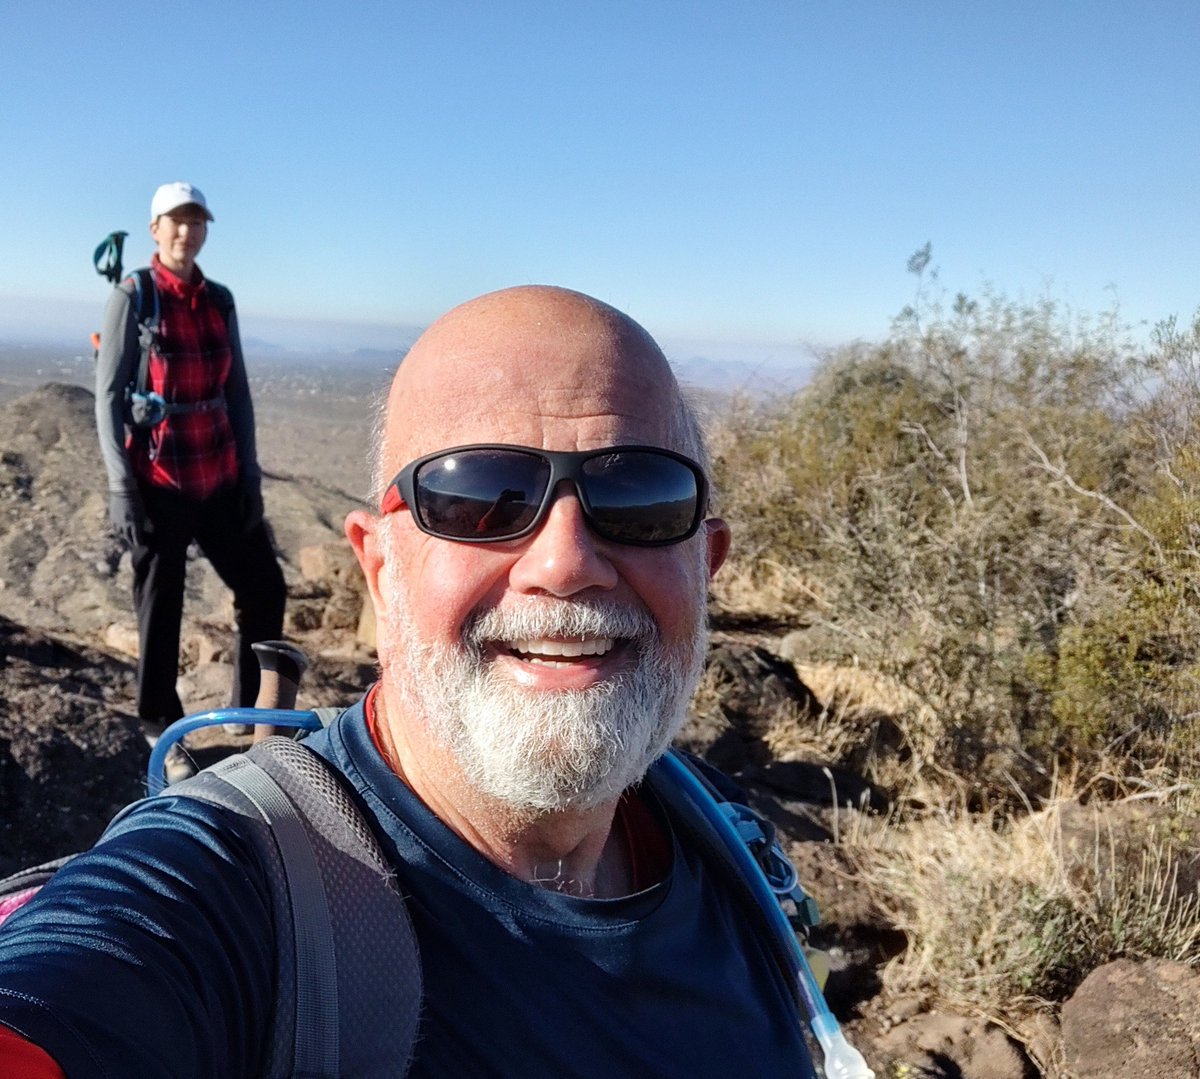 Busting out the miles with Jess in the McDowell Sonoran Preserve. Special thanks to @flipsockz